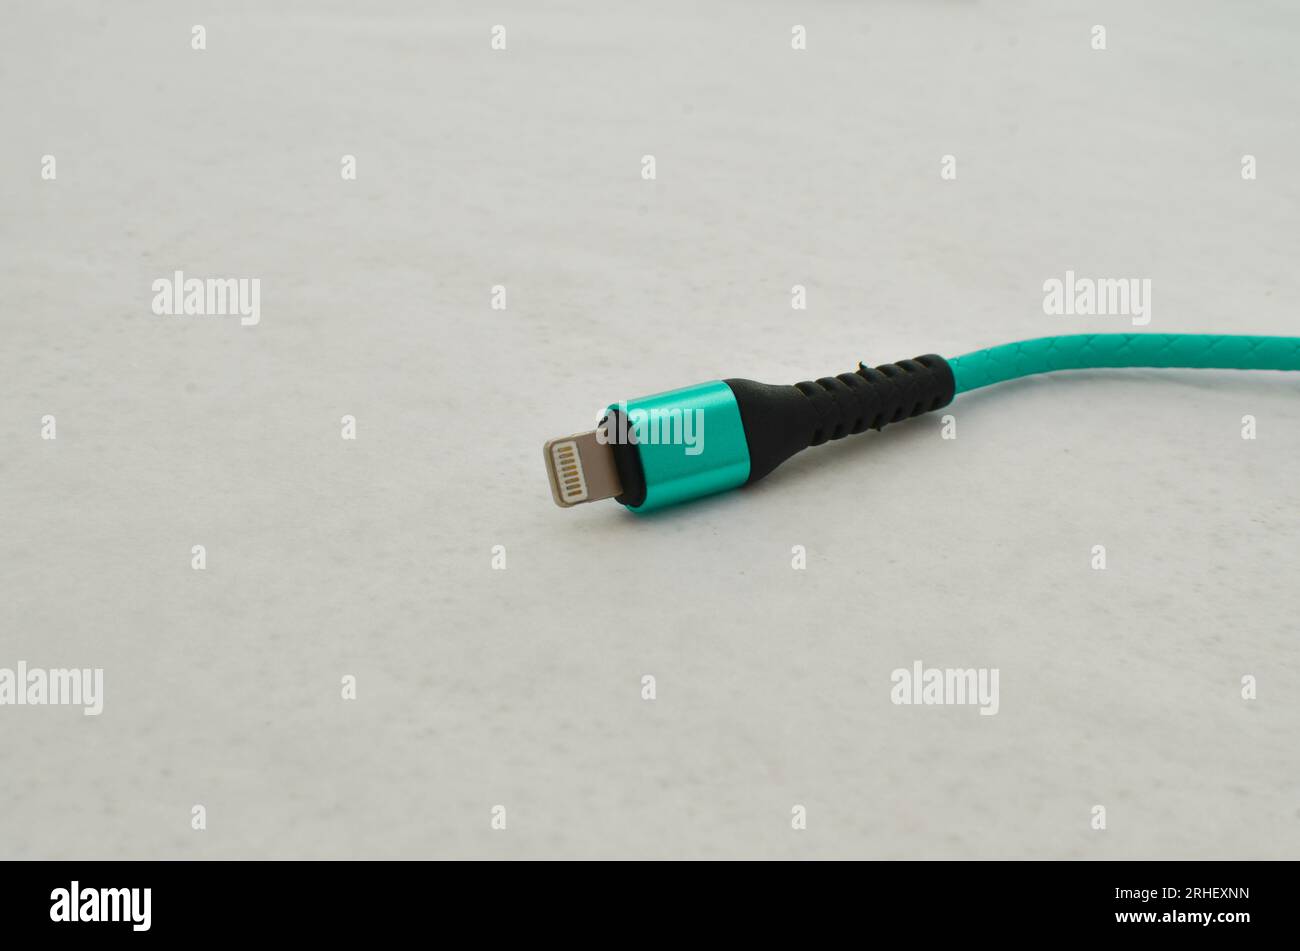 Apple USB cable connection detail highlighted on a light surface, perfect for modern technology concepts. Cable that provides speed and data transfer. Stock Photo